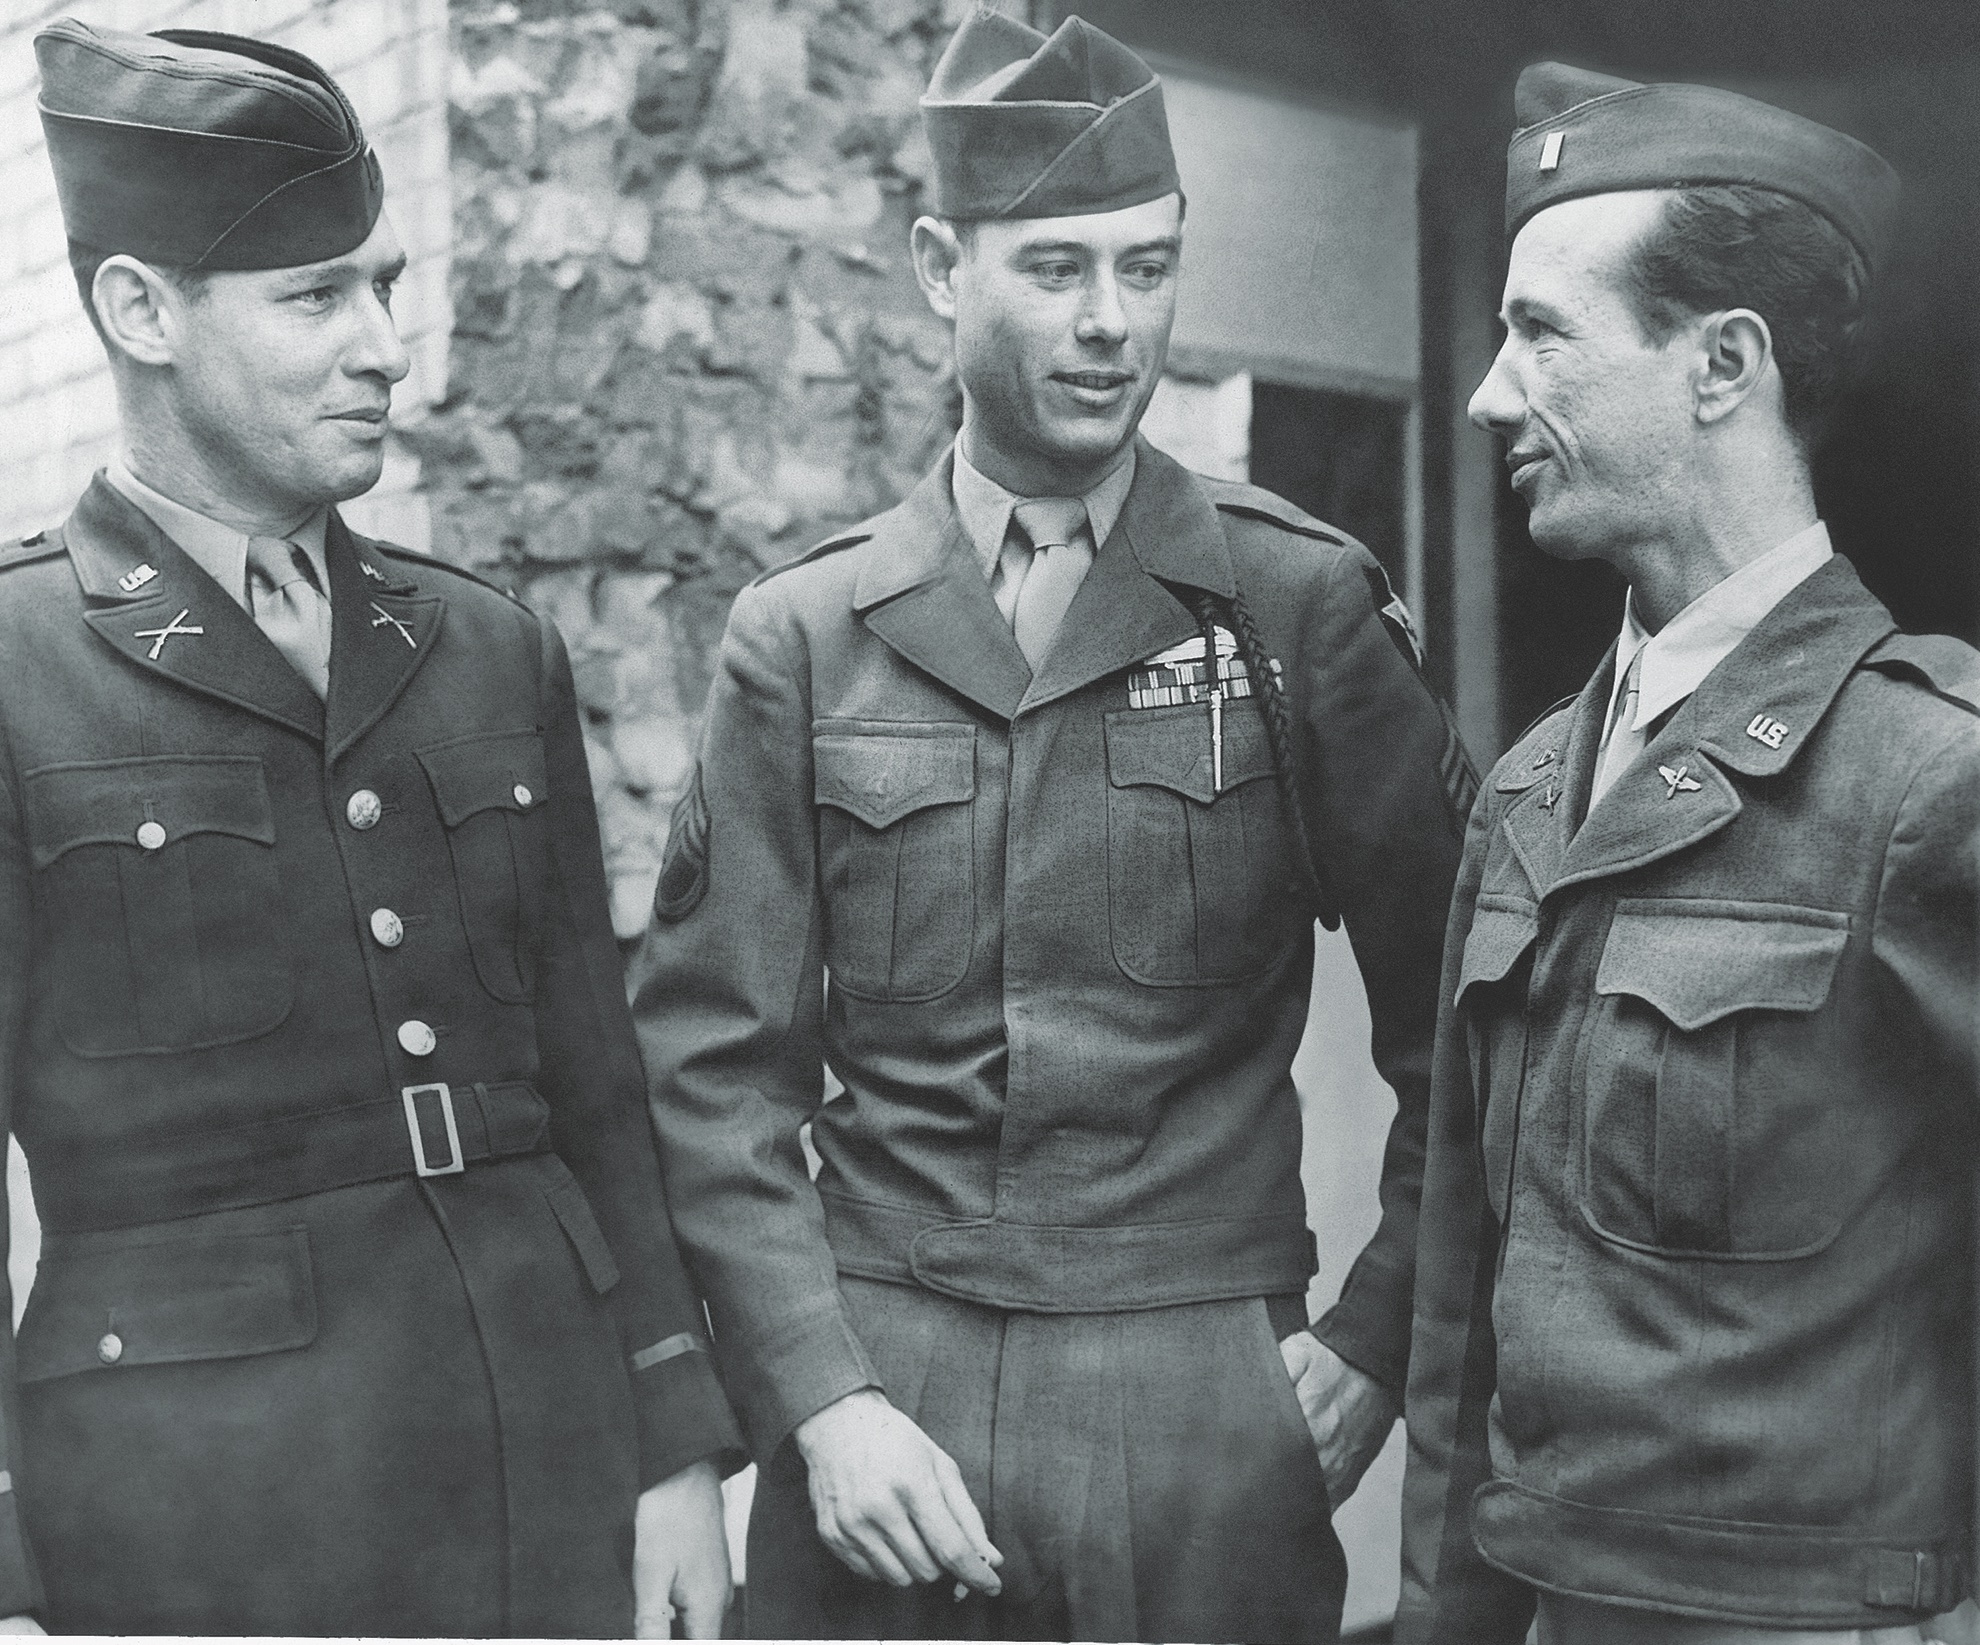 Presumably fearing retaliation, seven enlisted men confined at Lichfield refused to testify at the court-martial of a former guard, Staff Sergeant James M. Jones, shown here (center) with two members of his defense team. (Associated Press)